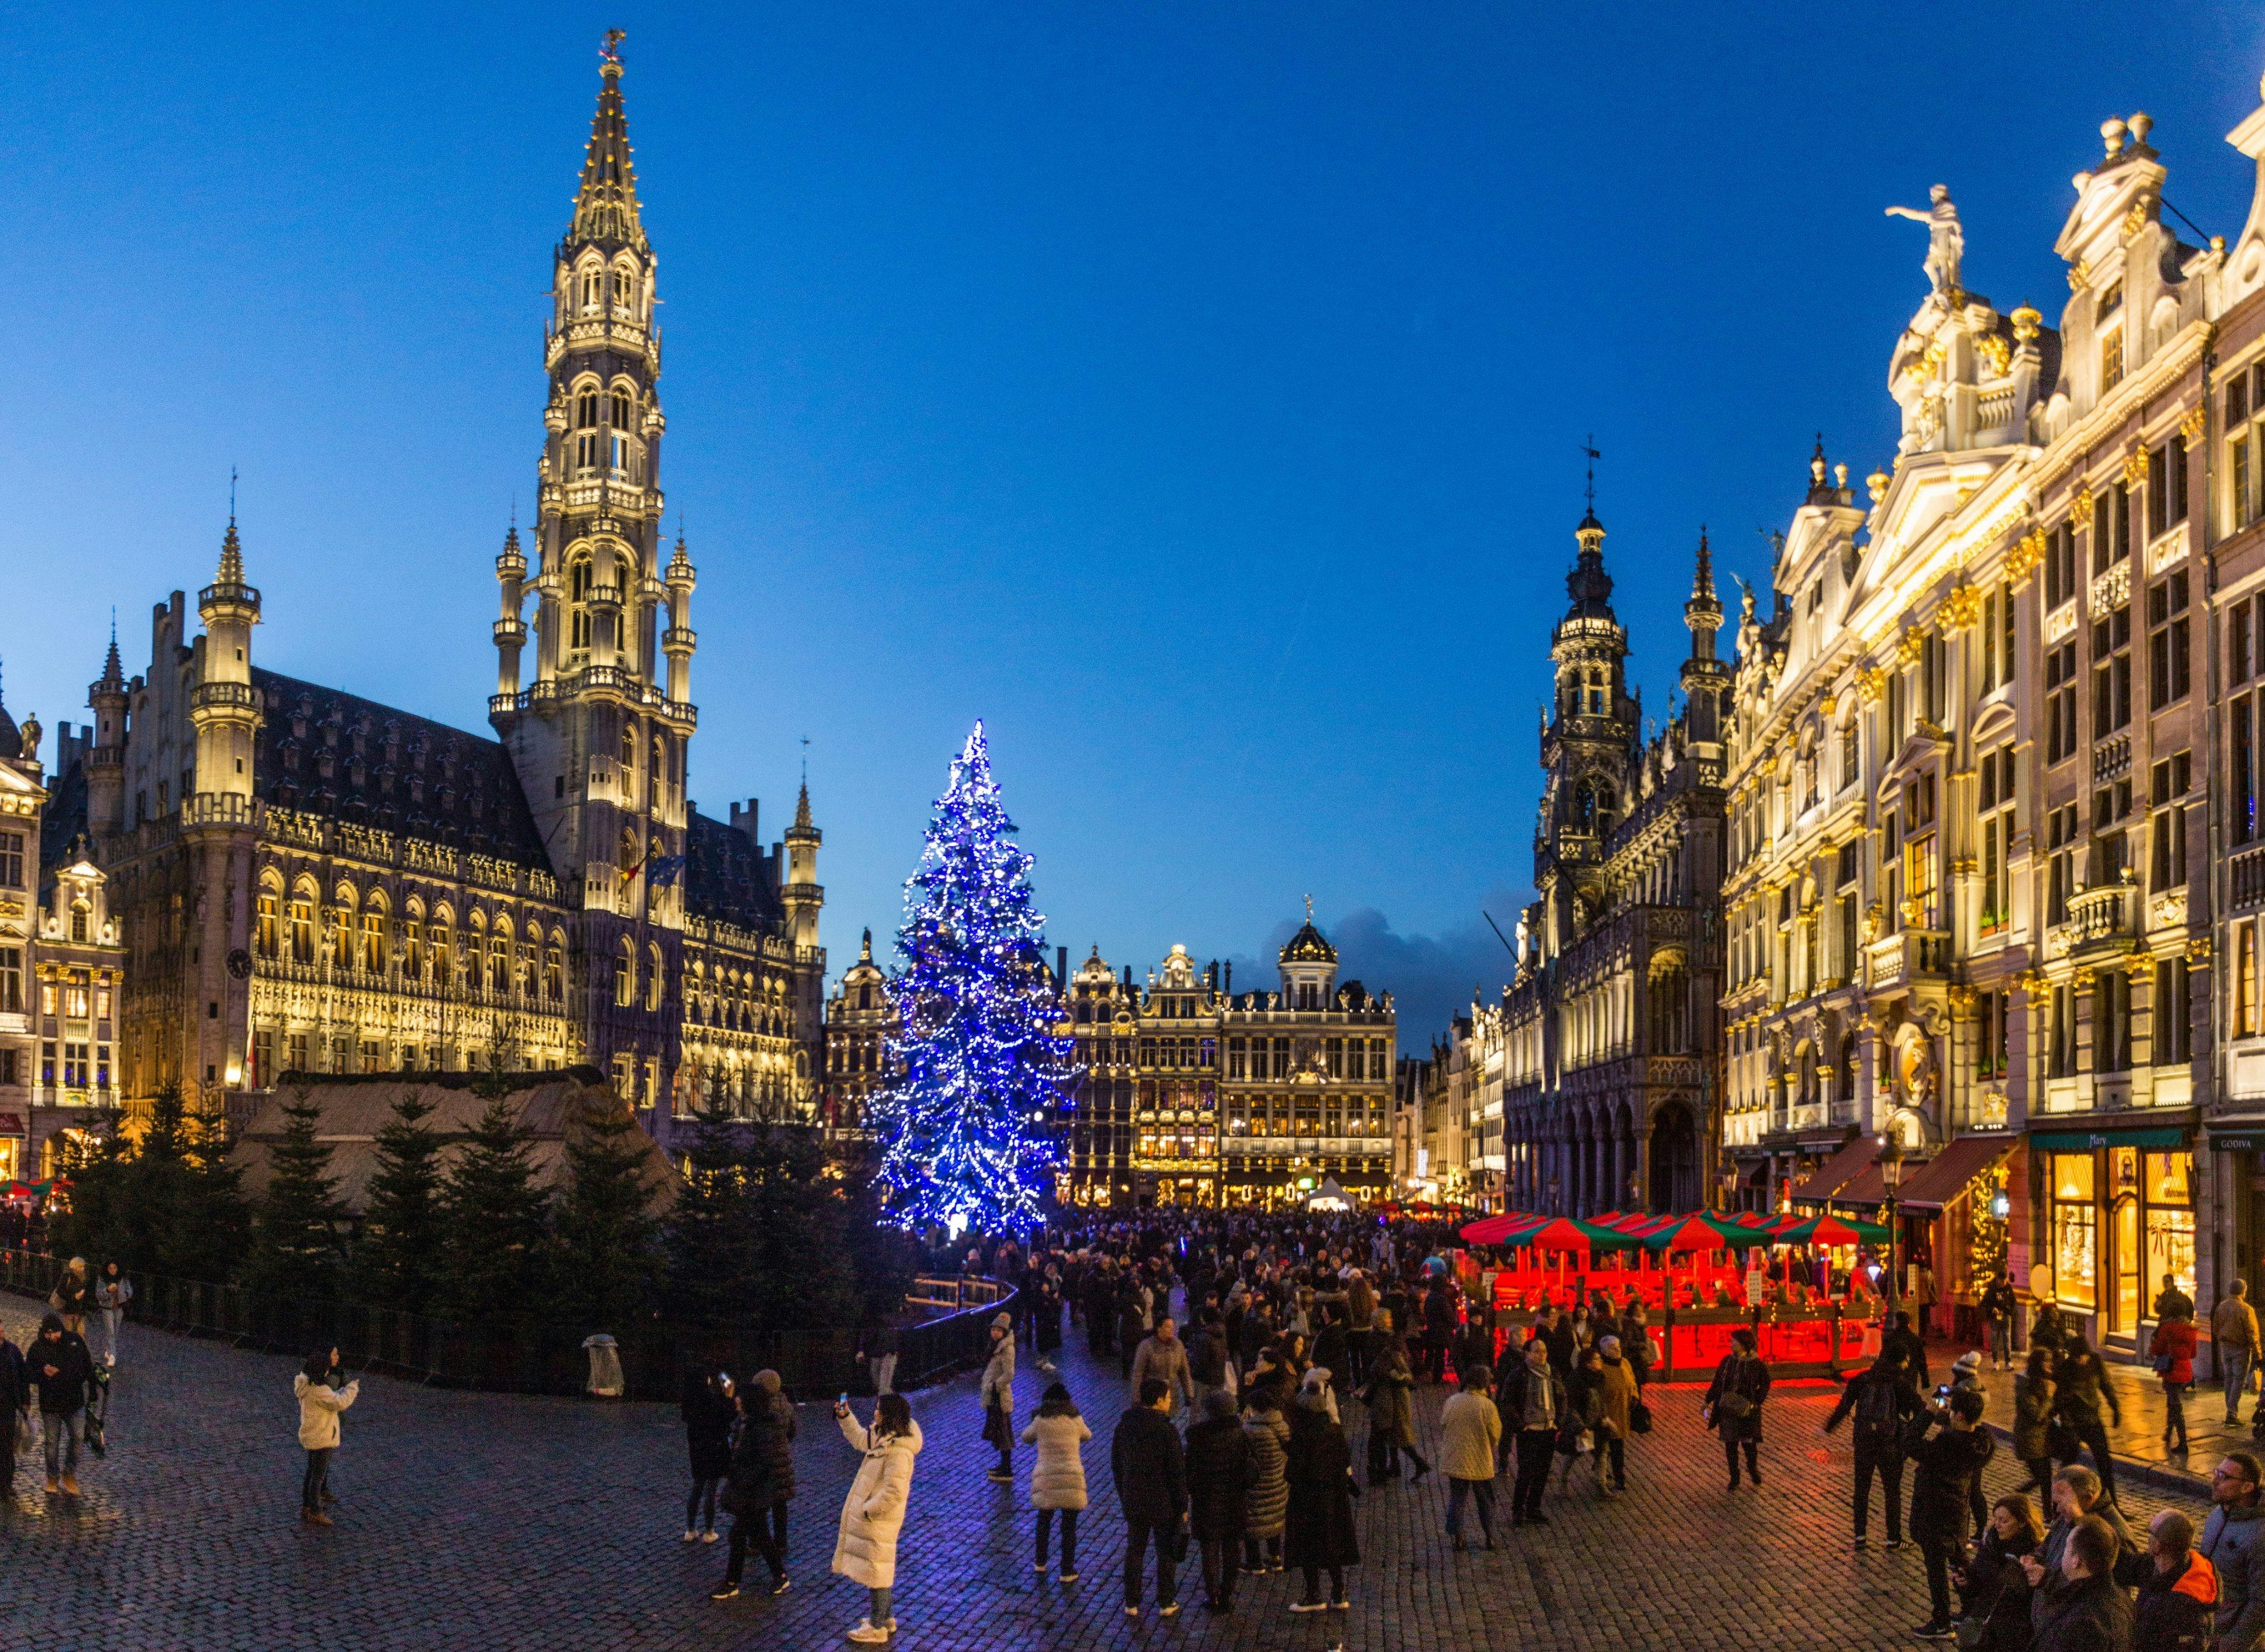 Christmas market crowds at the Grote Markt (Grand Place) in Brussels 